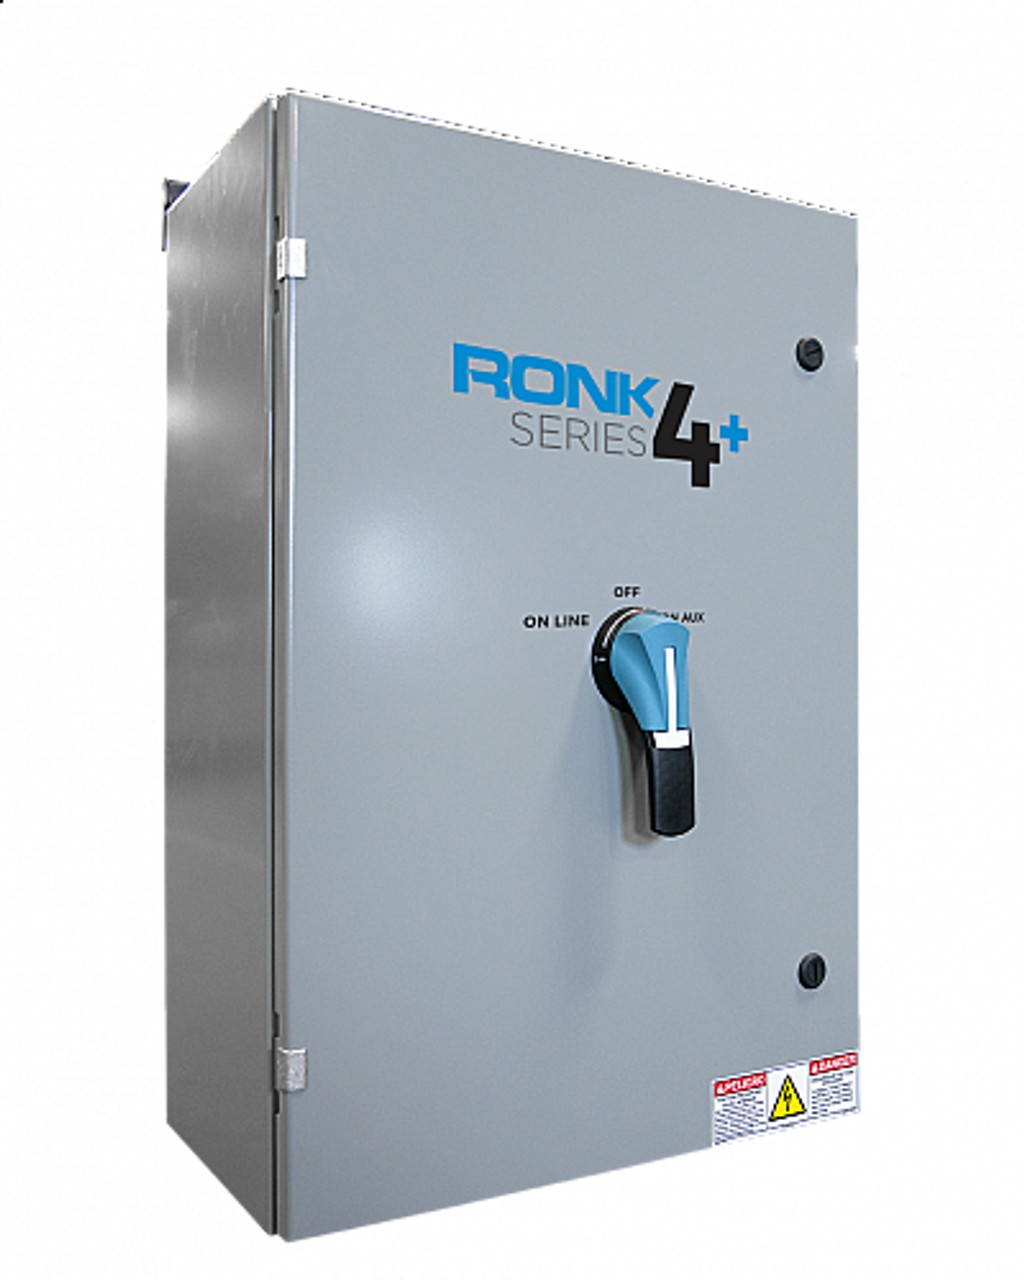 RONK 5102SE-SS 100A 2POLE 240V MANUAL TRANSFER SWITCH CENTER OFF STAINLESS ENCLOSURE